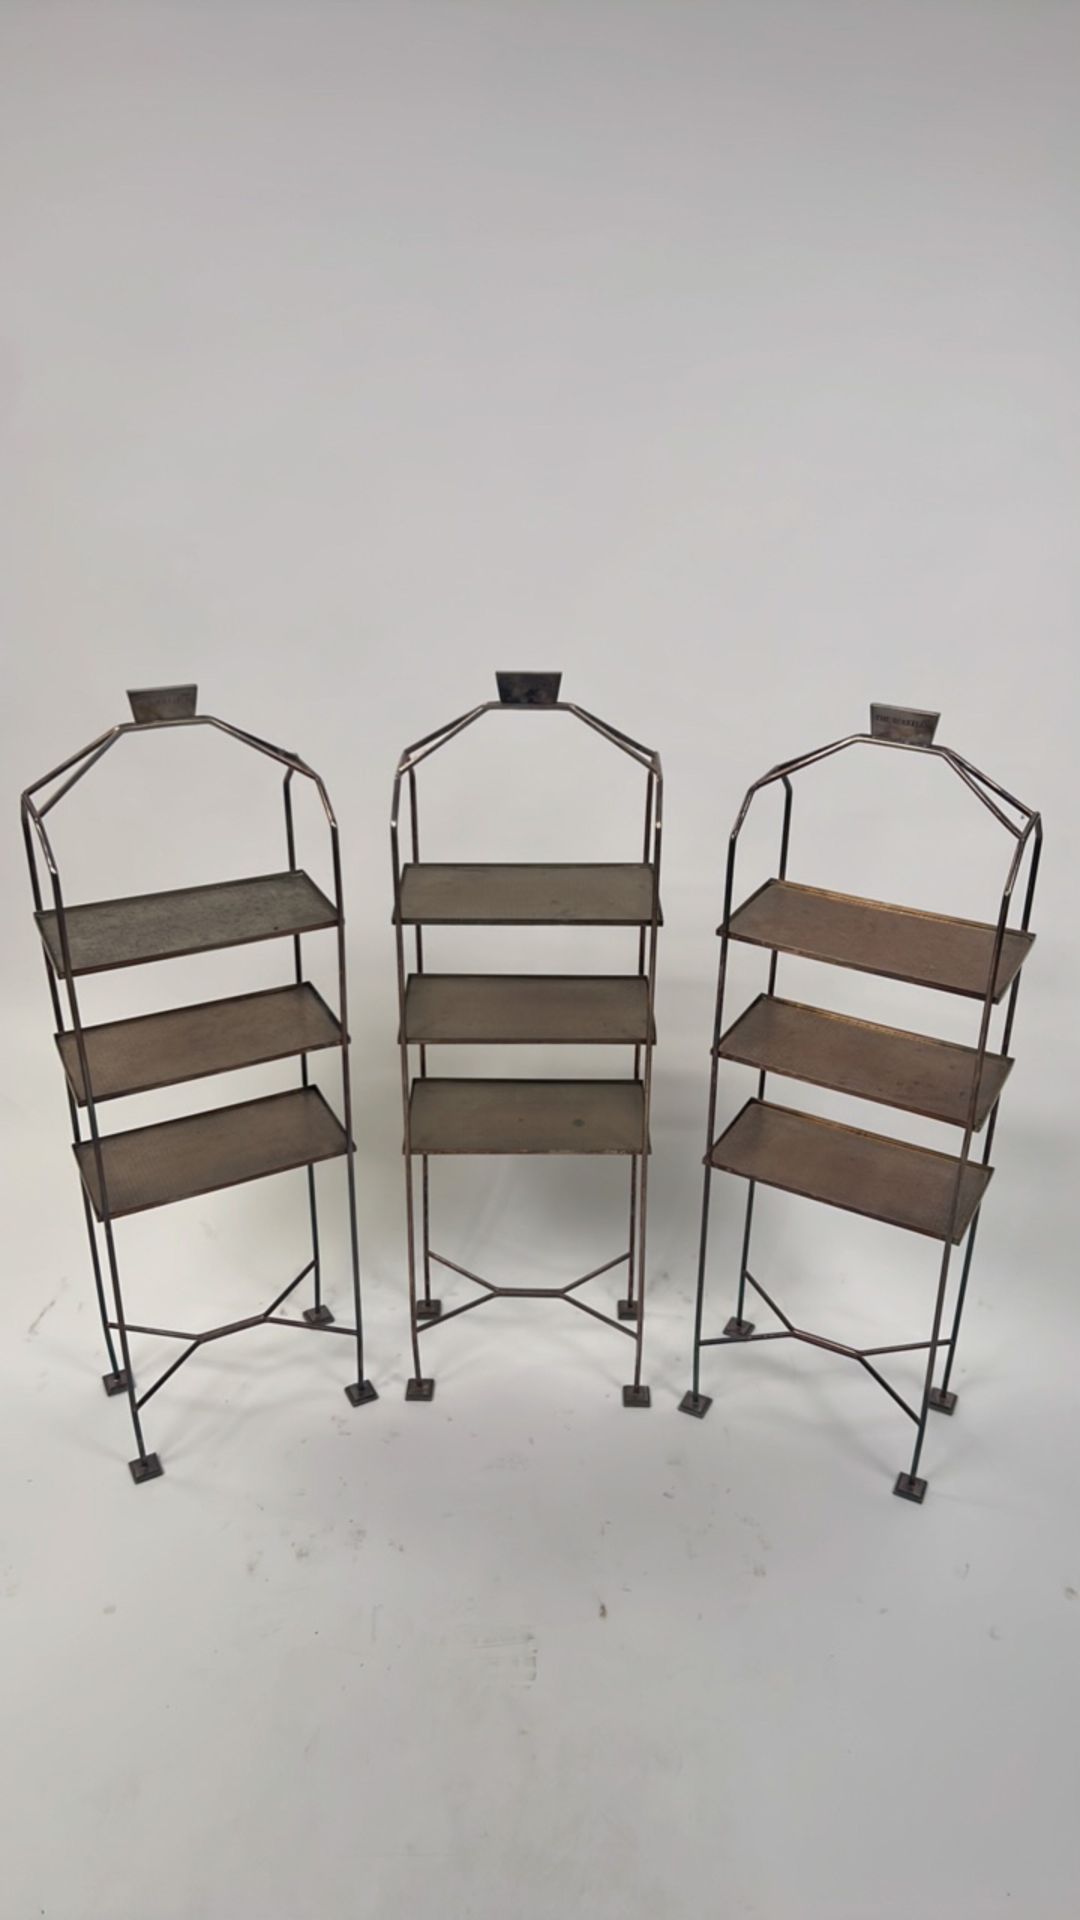 A trio of metal sandwich and cake stands